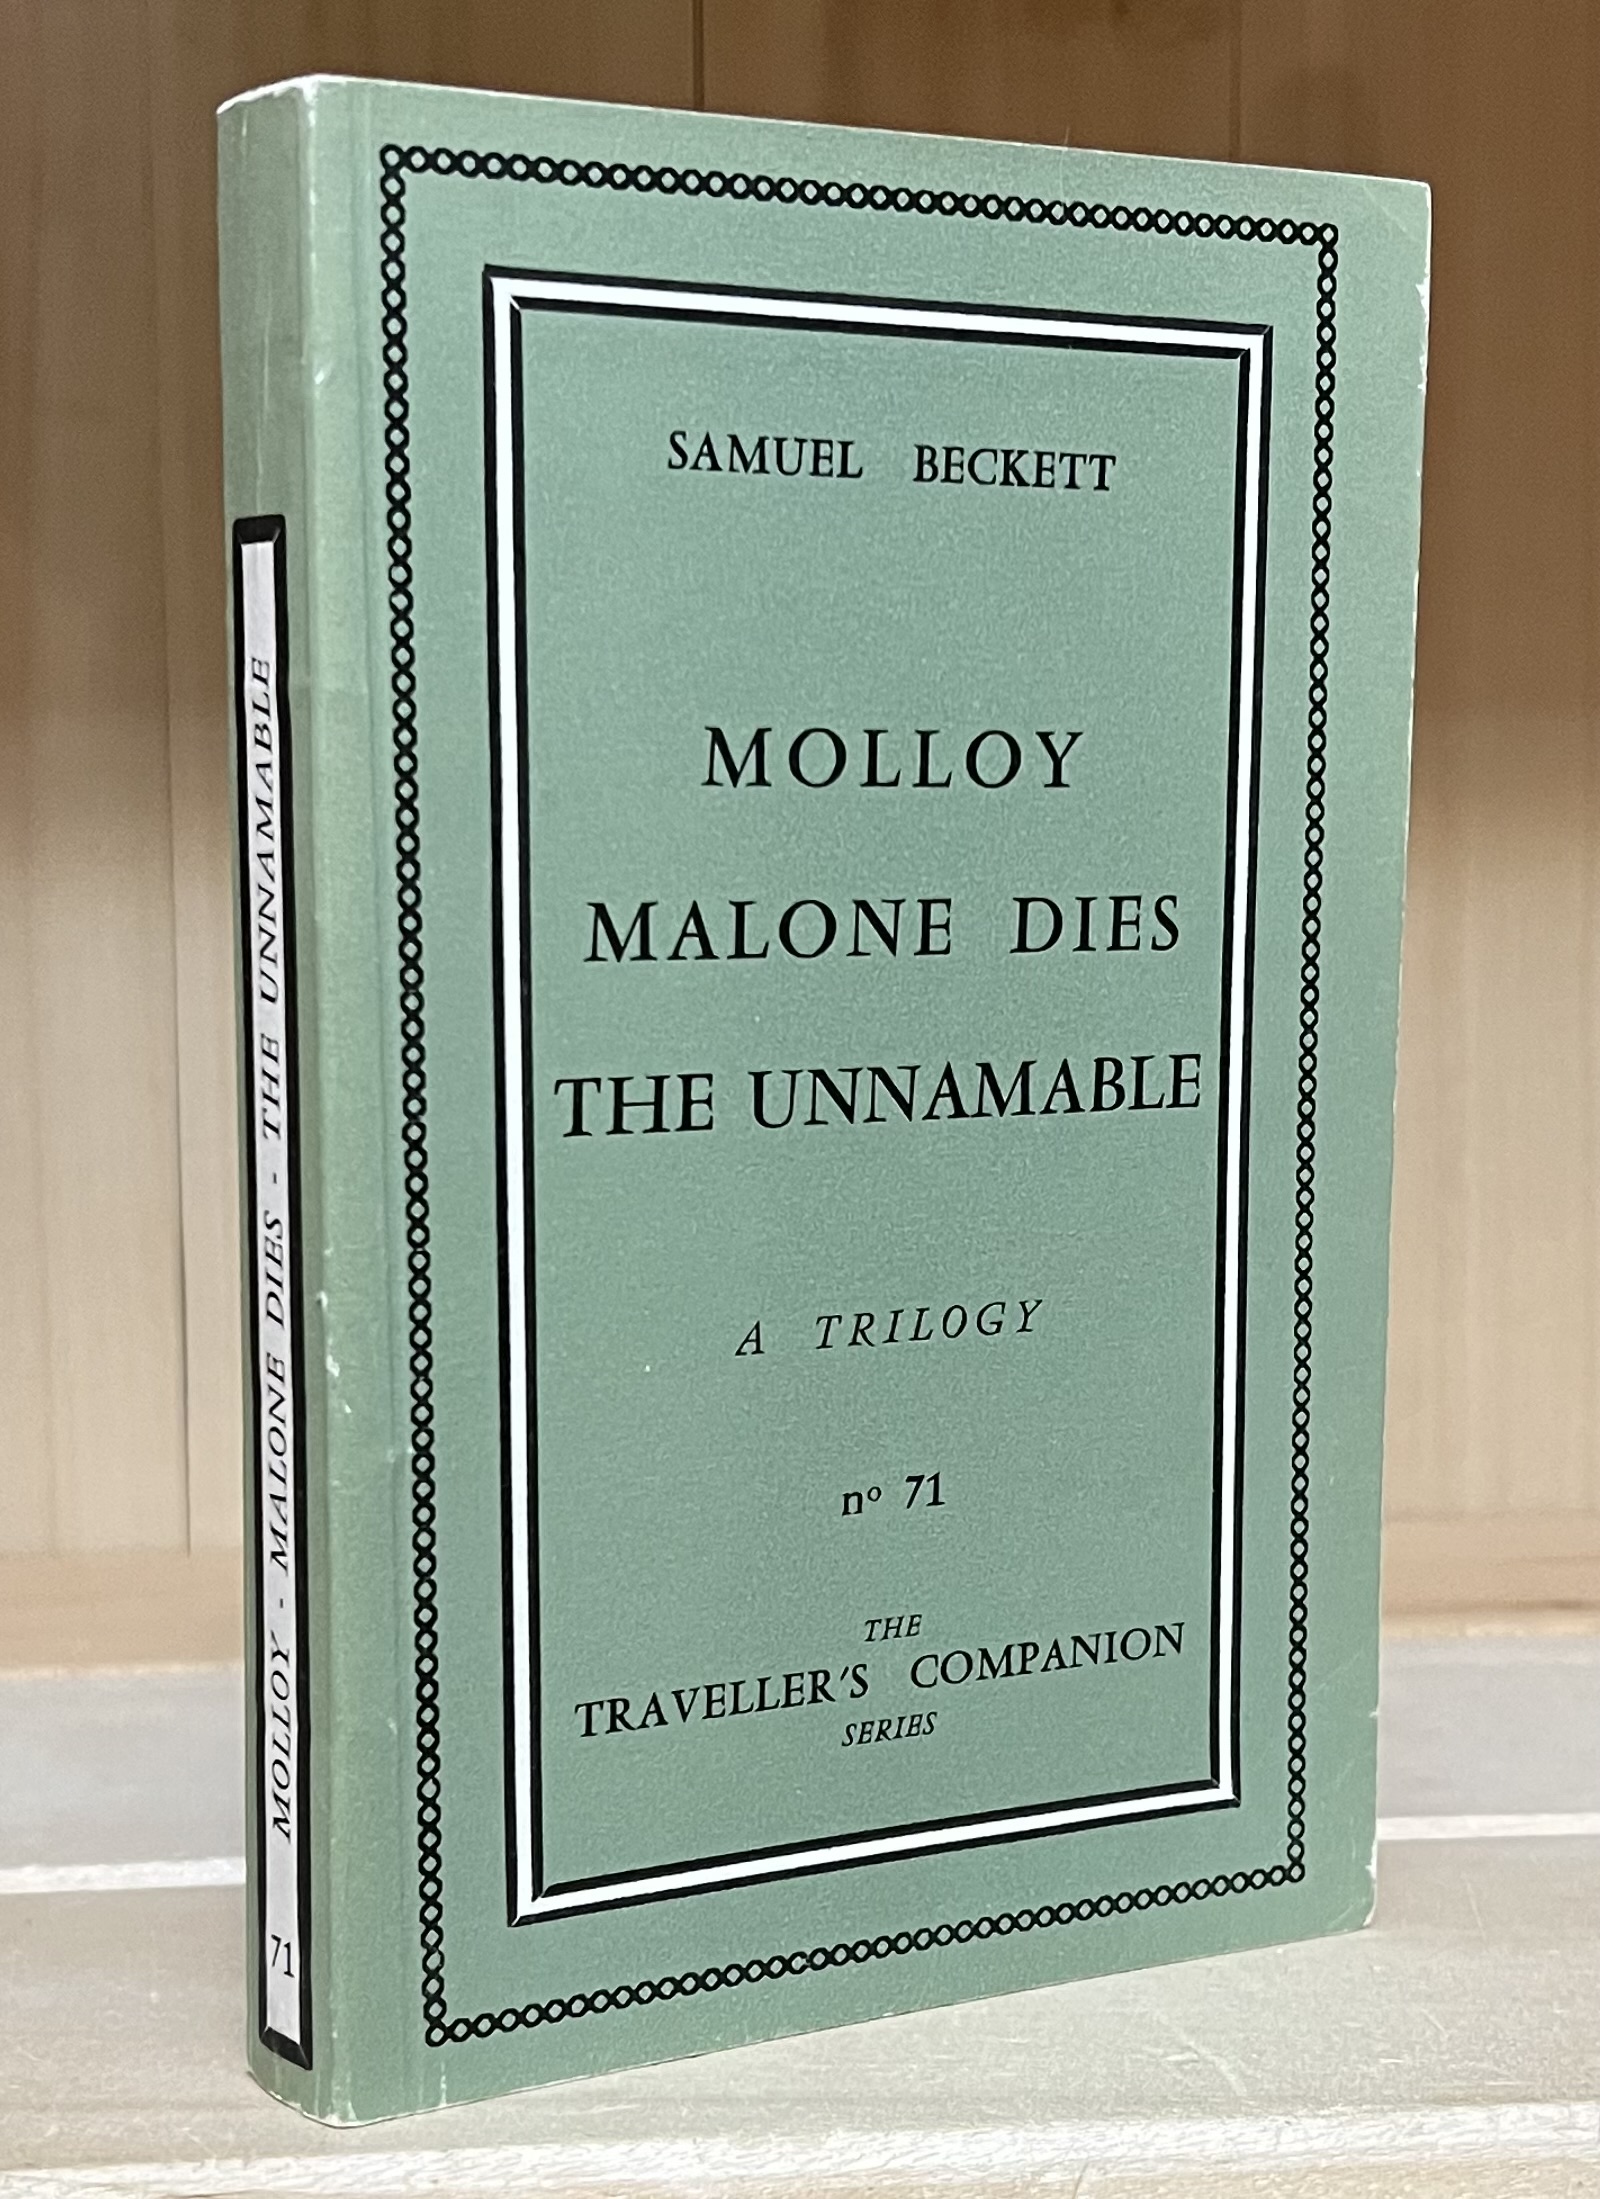 Image for Molloy / Malone Dies / The Unnamable : A Trilogy (The Traveller's Companion Series, No. 71)